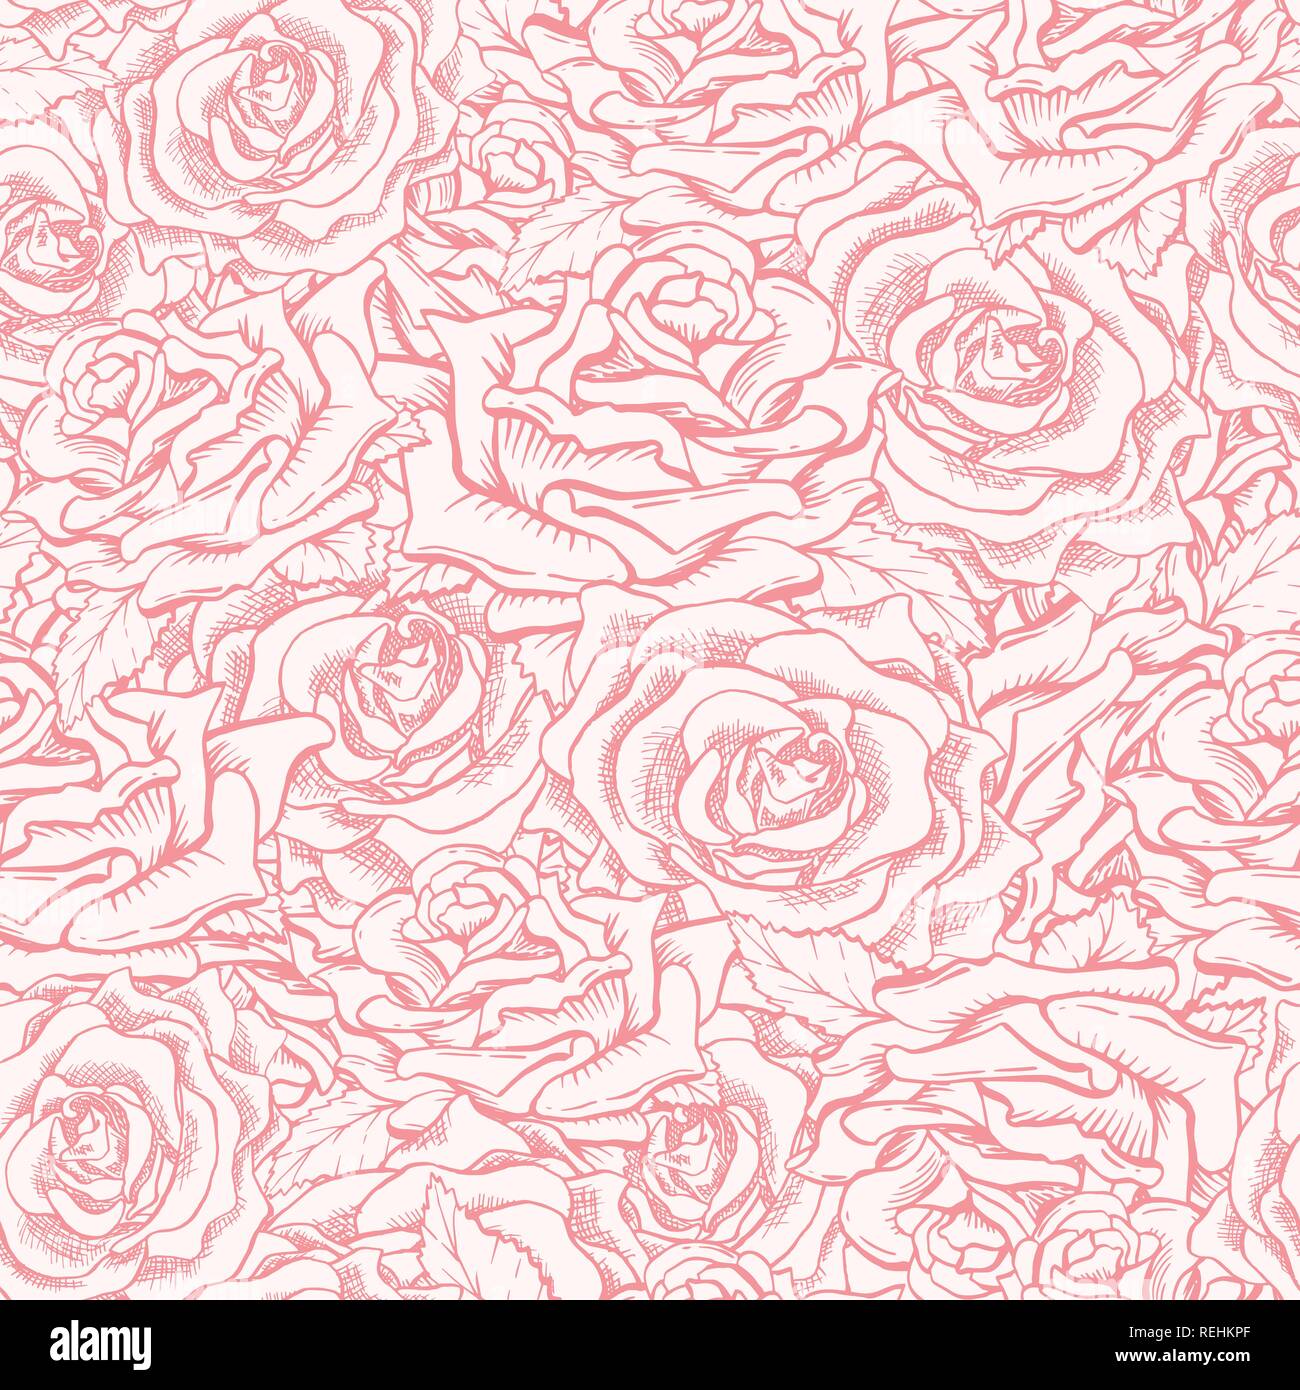 Red or Pink Roses Seamless Pattern with Sketch Hand Drawn Flowers for Valentines Day Gift Paper or Card Design. Engraved Freehand Rose. Floral Pattern Stock Vector